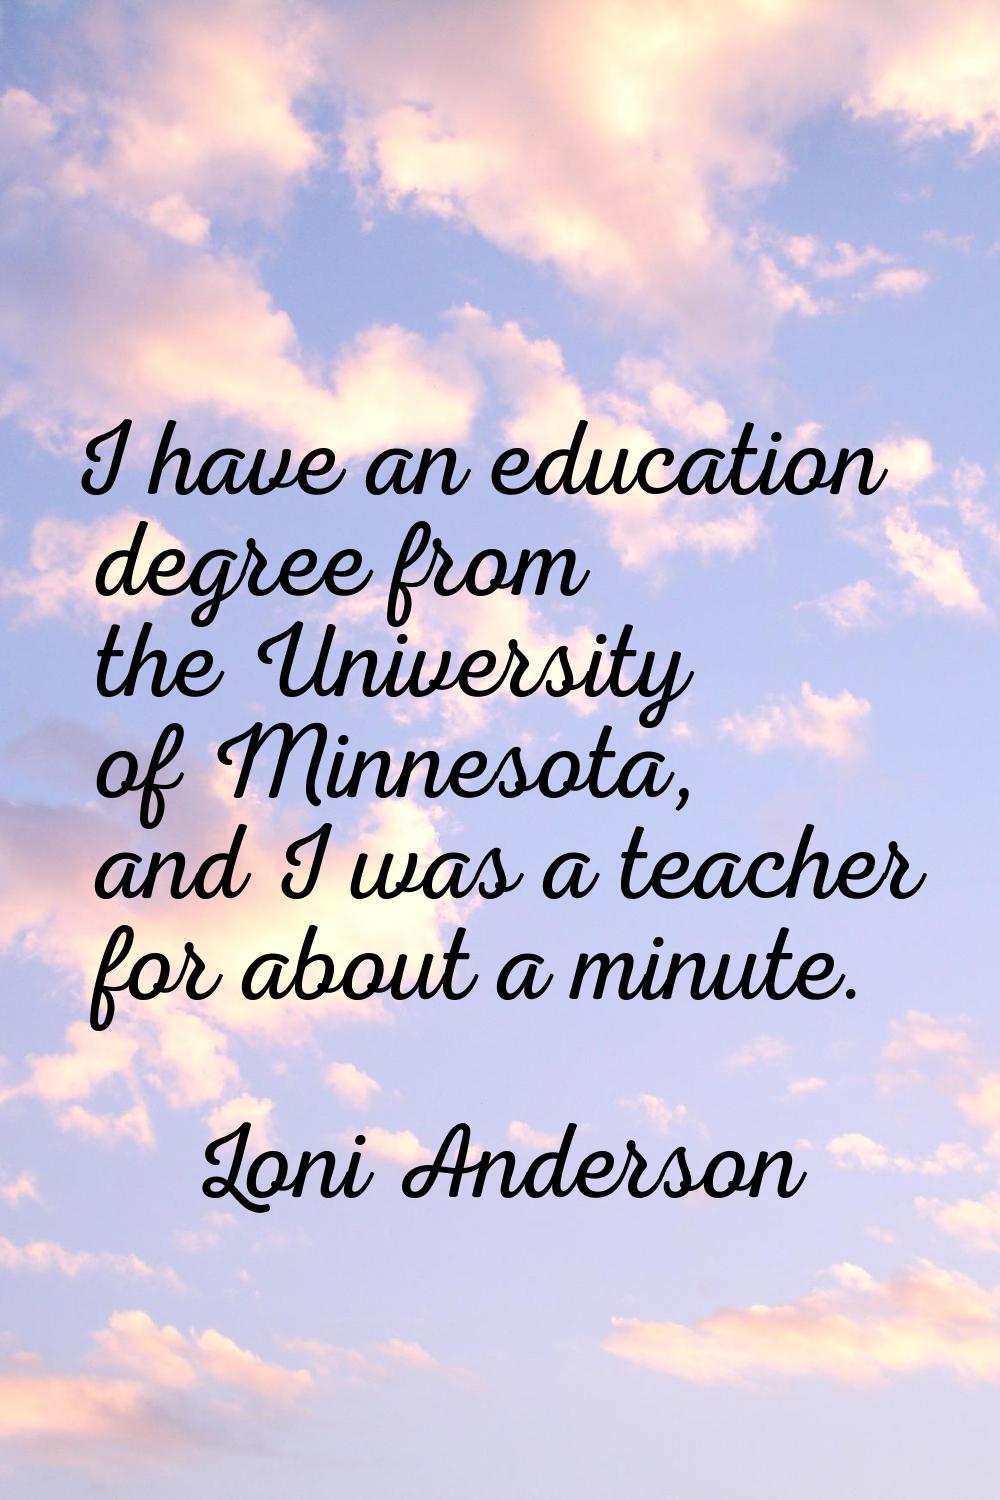 I have an education degree from the University of Minnesota, and I was a teacher for about a minute